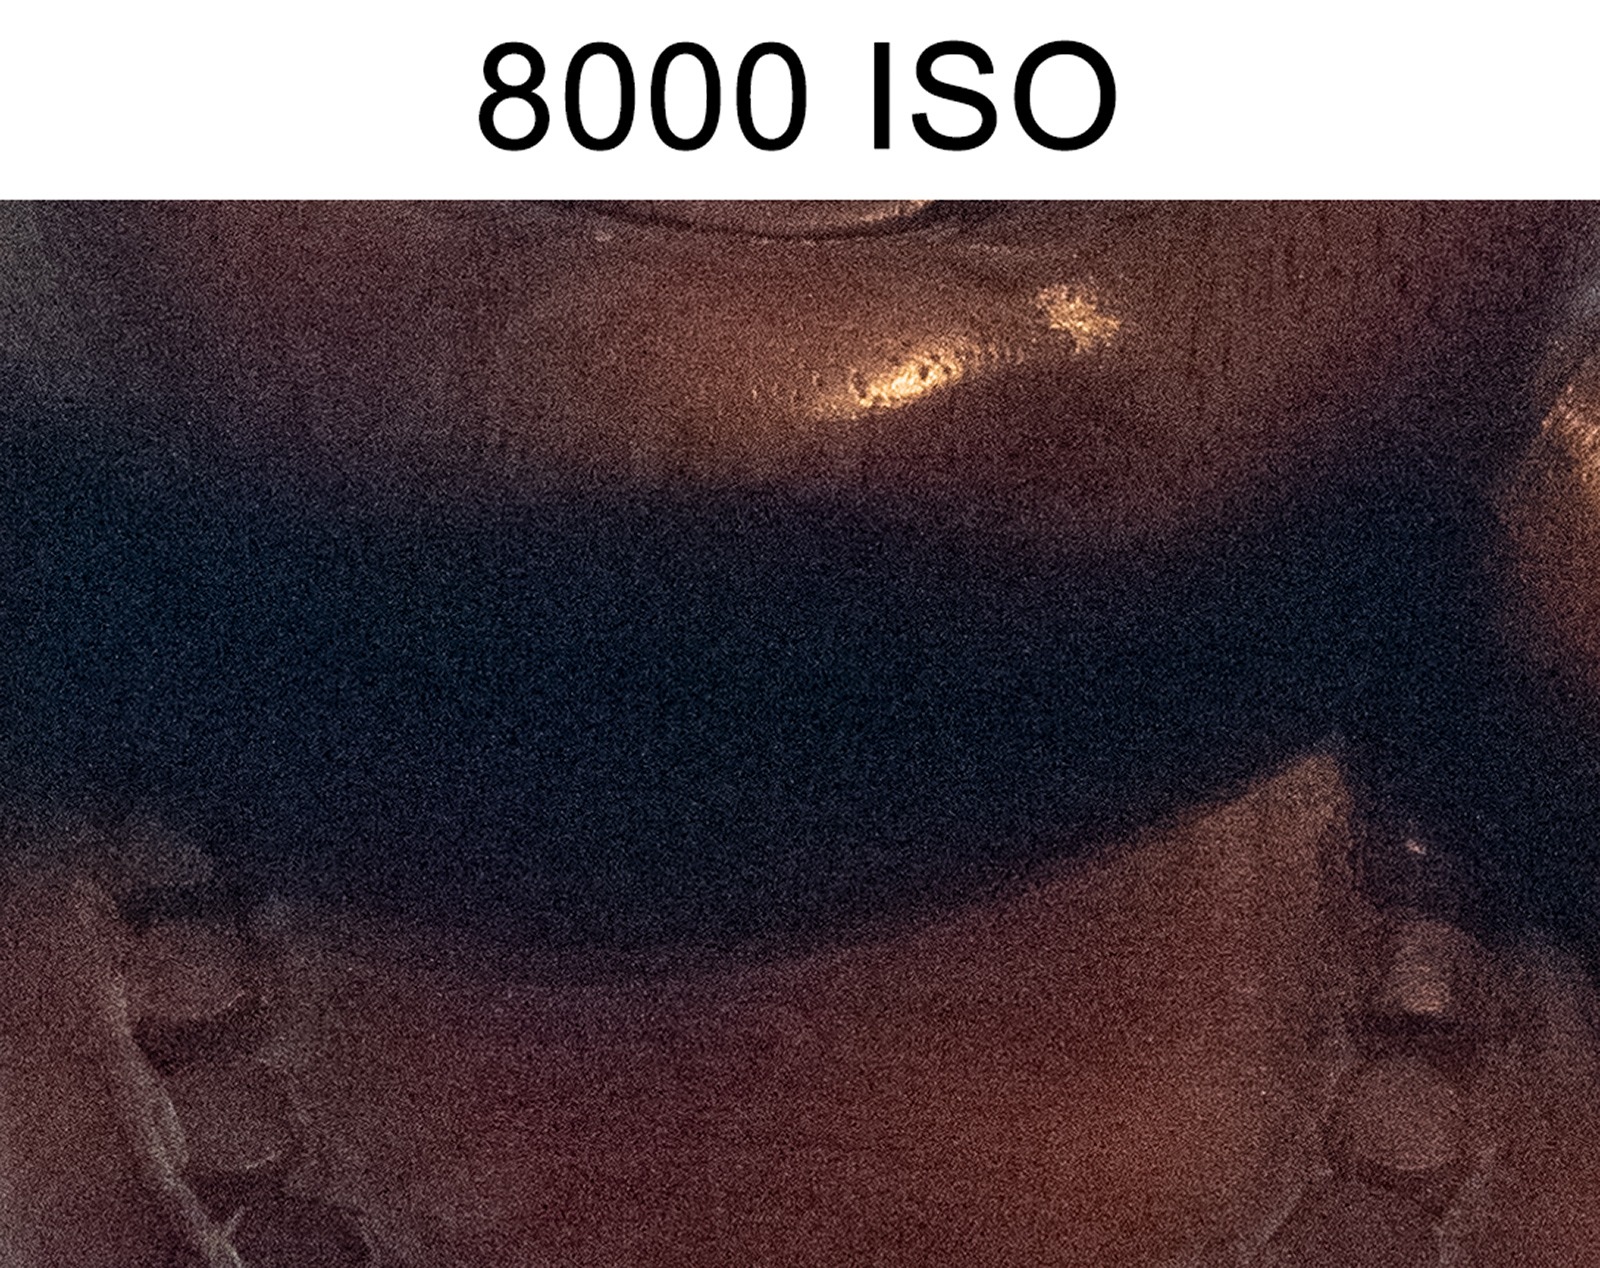 8000 iso